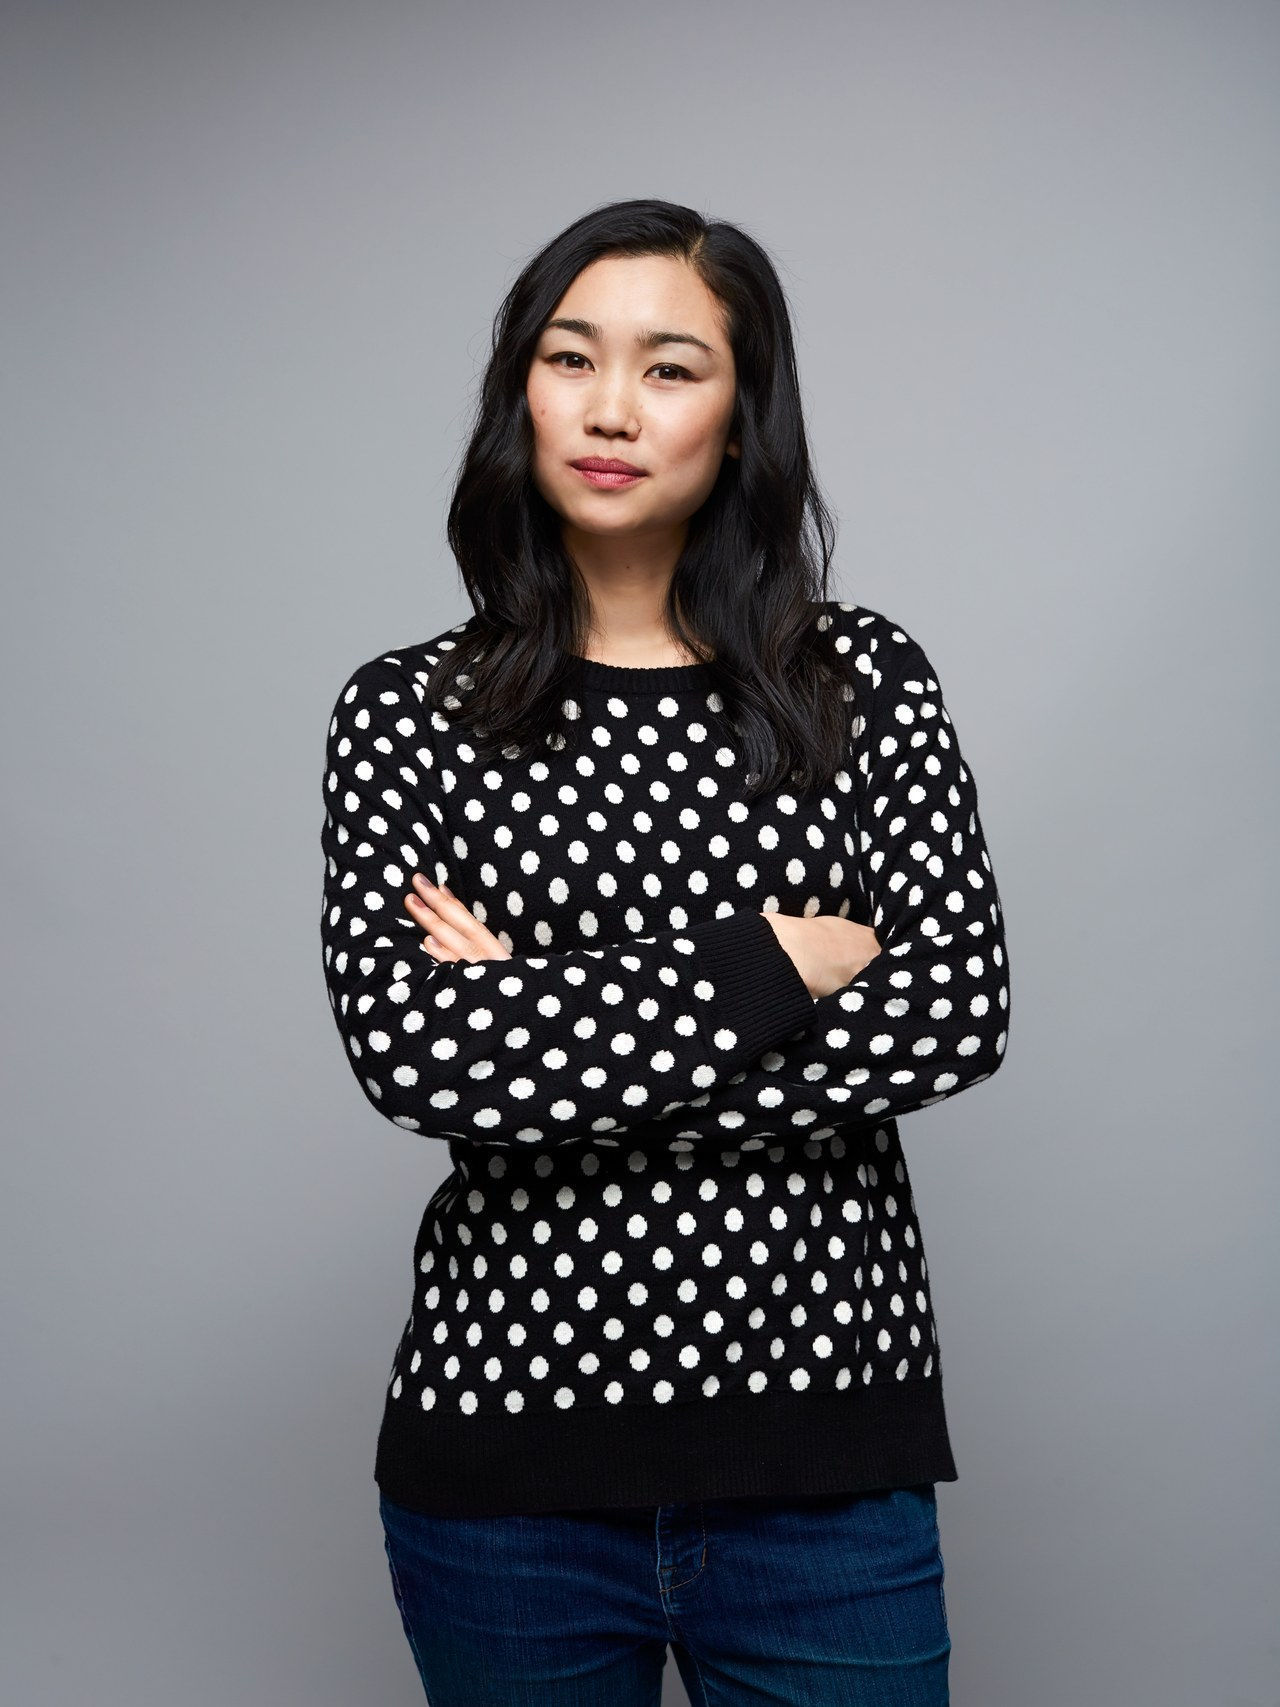 Tracy Chou is fighting for equal pay in tech